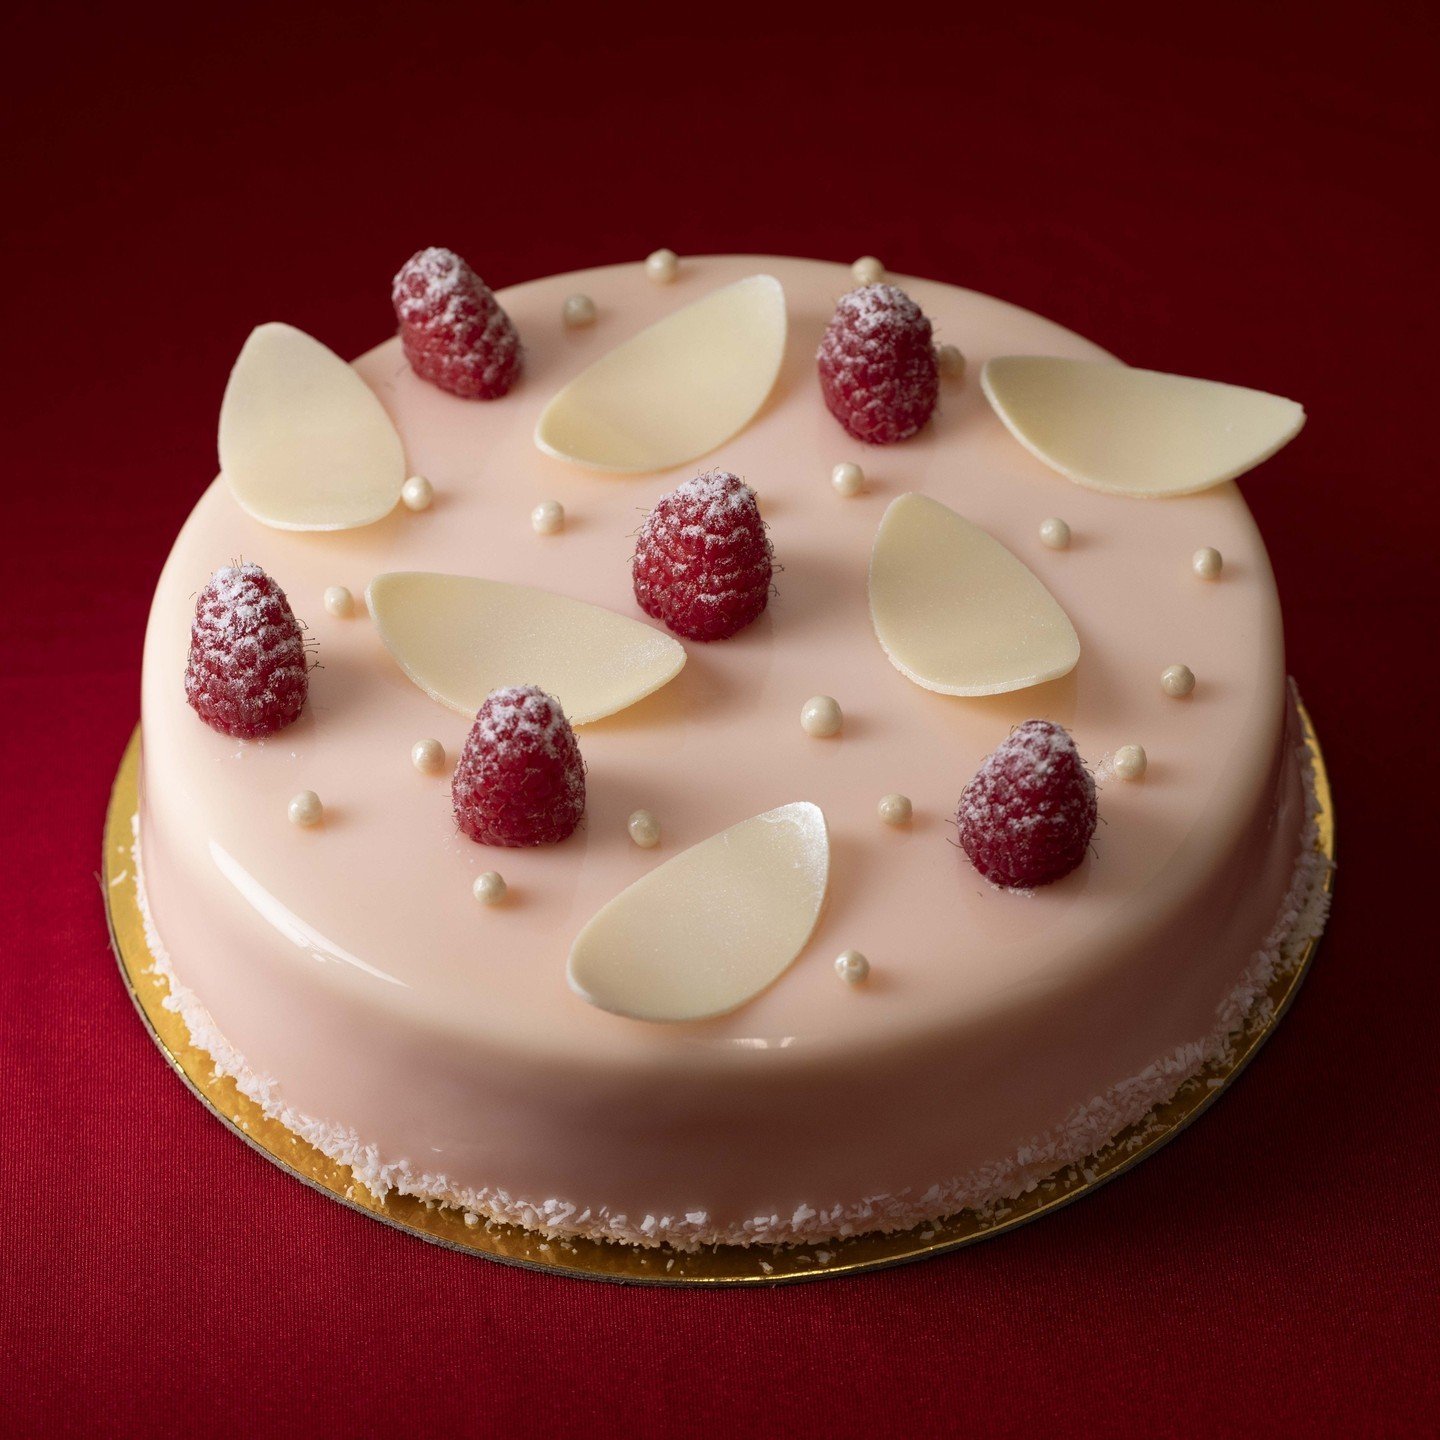 Don't forget to place your Mother's Day pre-order before our orders close at 4pm today! Celebrate mom with a gift as sweet as she is, like the Caia: a sour cream sponge paired with white chocolate mousse and summer berry compote.